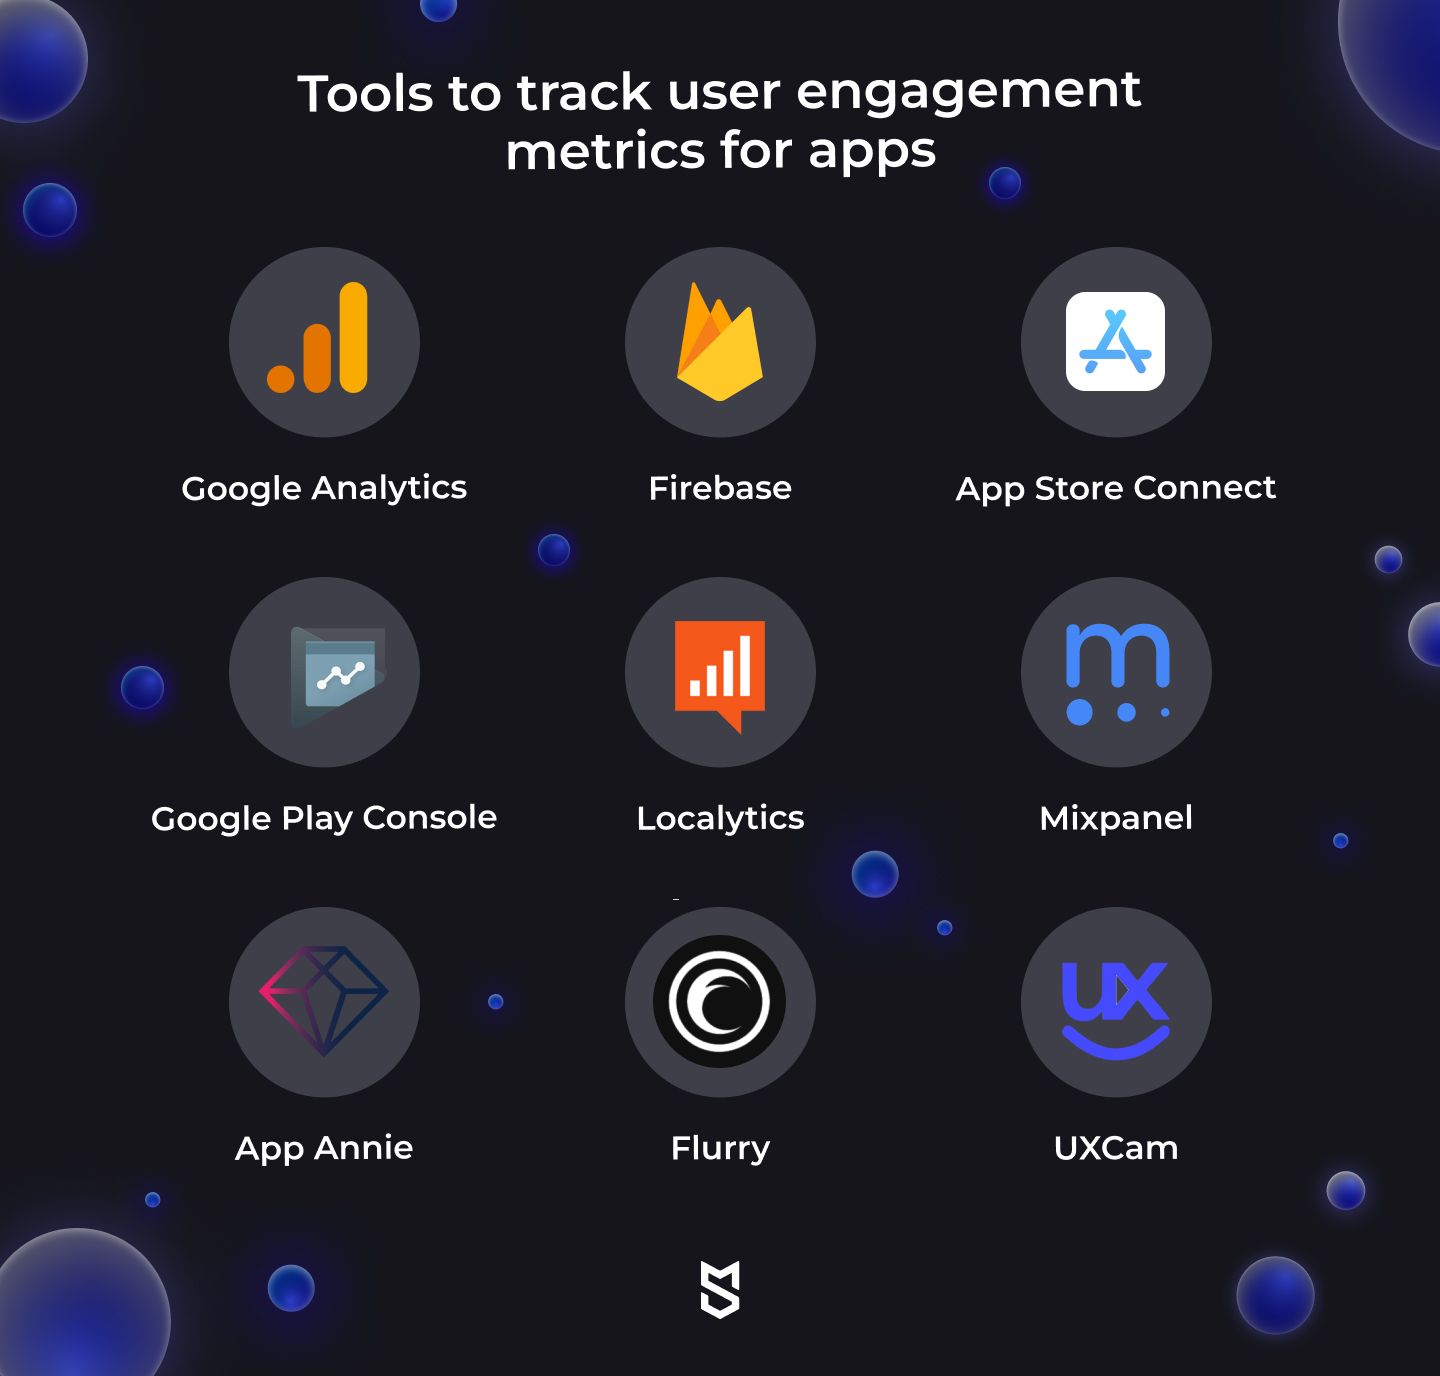 Tools to track user engagement metrics for apps